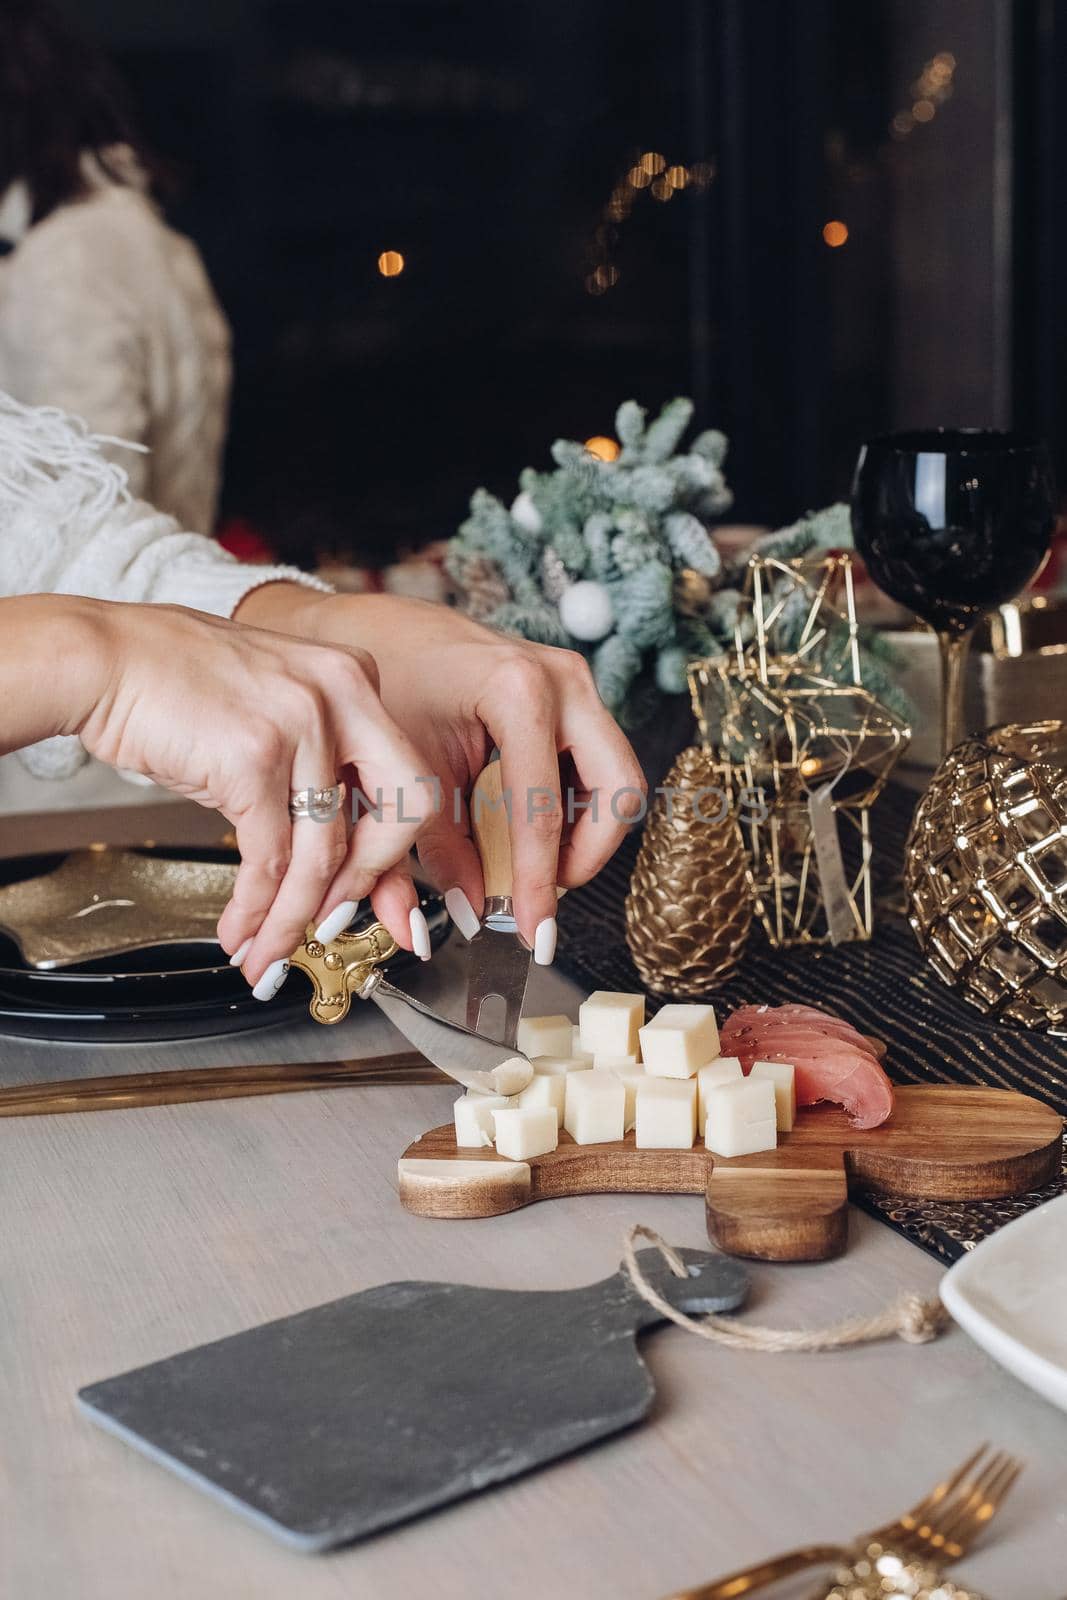 Cropped photo of woman tasting cheese on a wooden board with Christmas decorations in the background